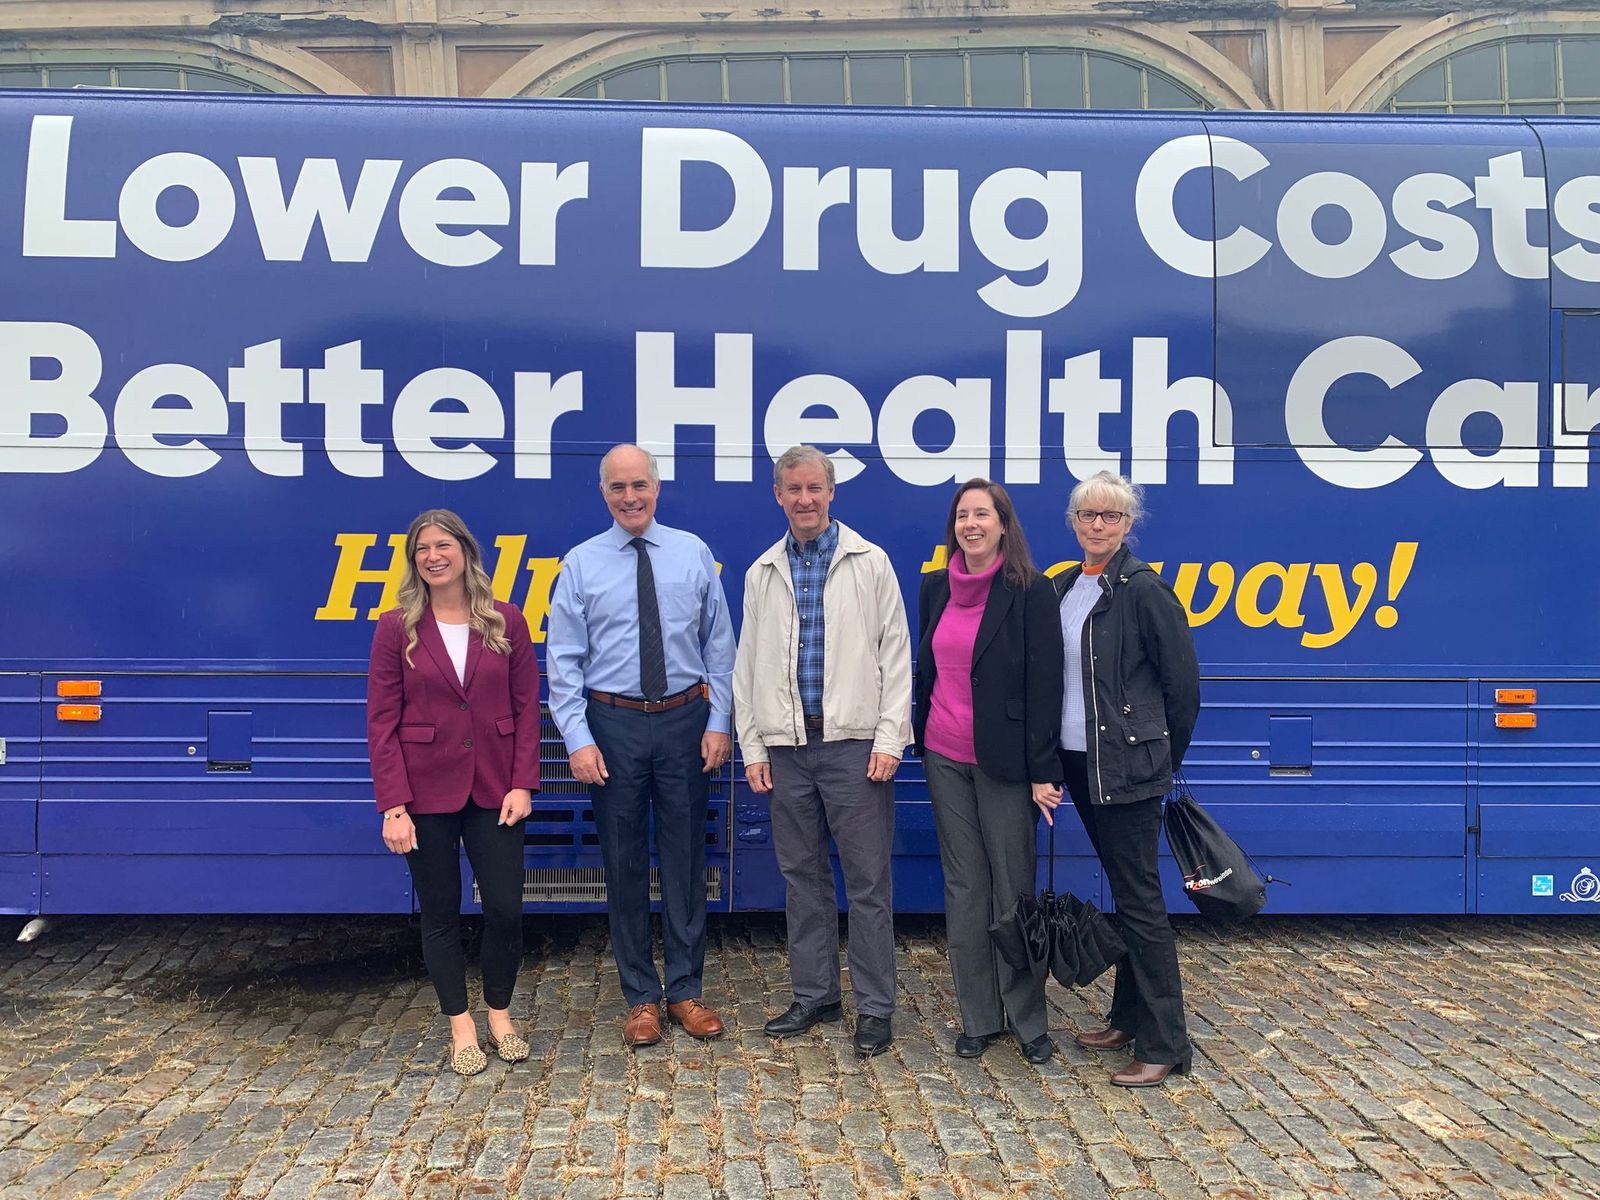 Rep Cartwright standing in front of bus reading: Lower drug costs, better health care